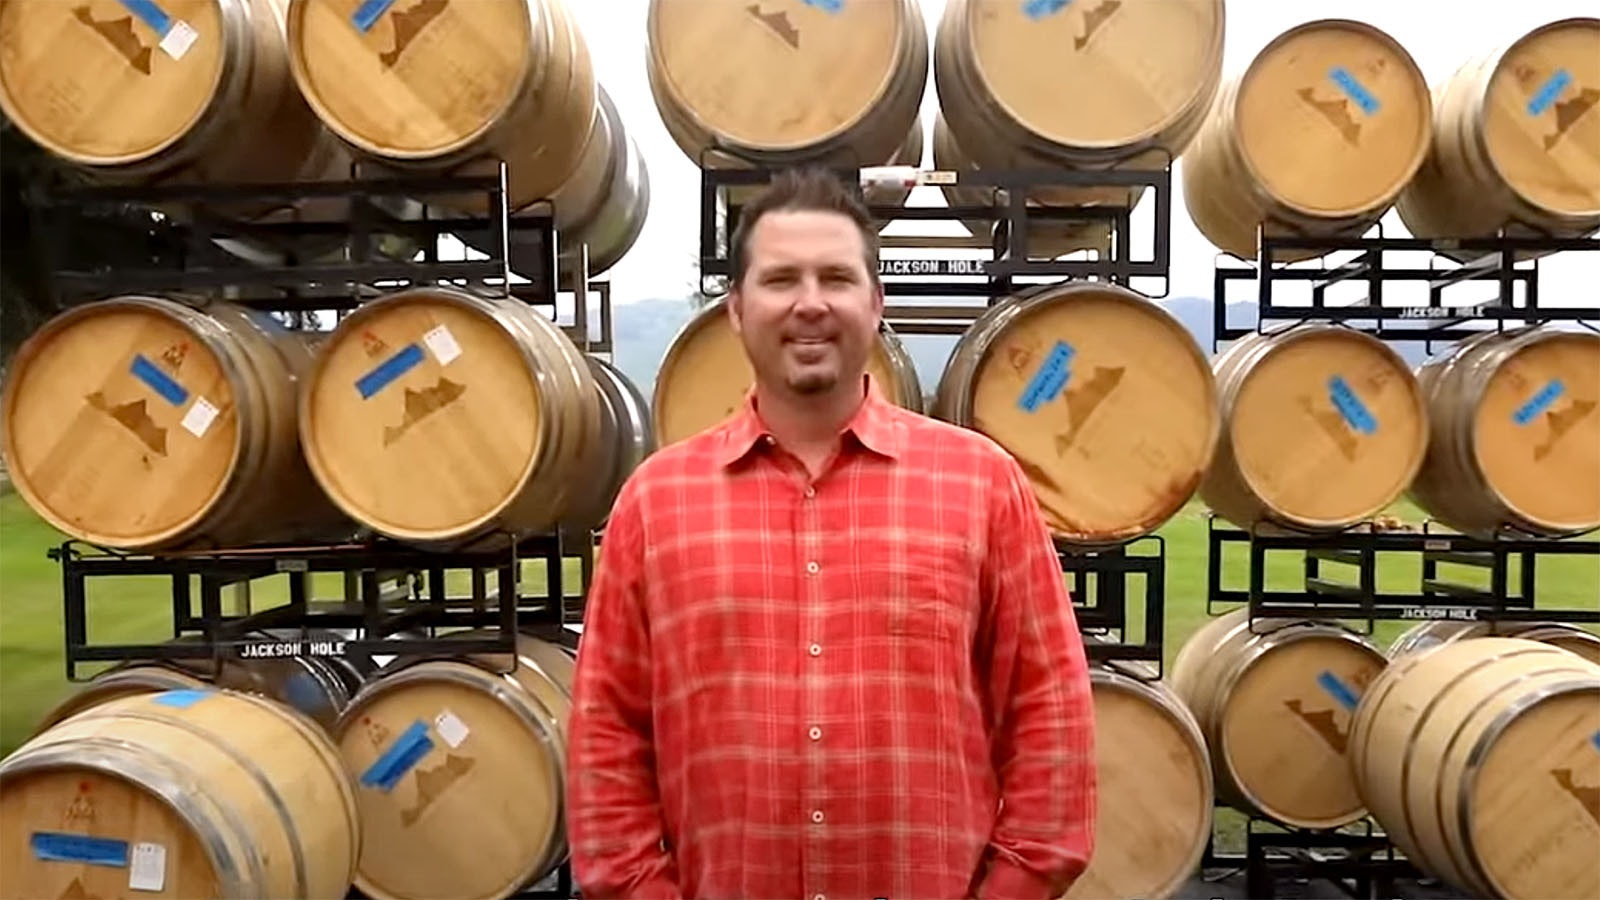 Bob Schroth, owner of Jackson Hole Winery, in a YouTube video about the winery posted three years ago on the Jackson Hole Traveler channel.